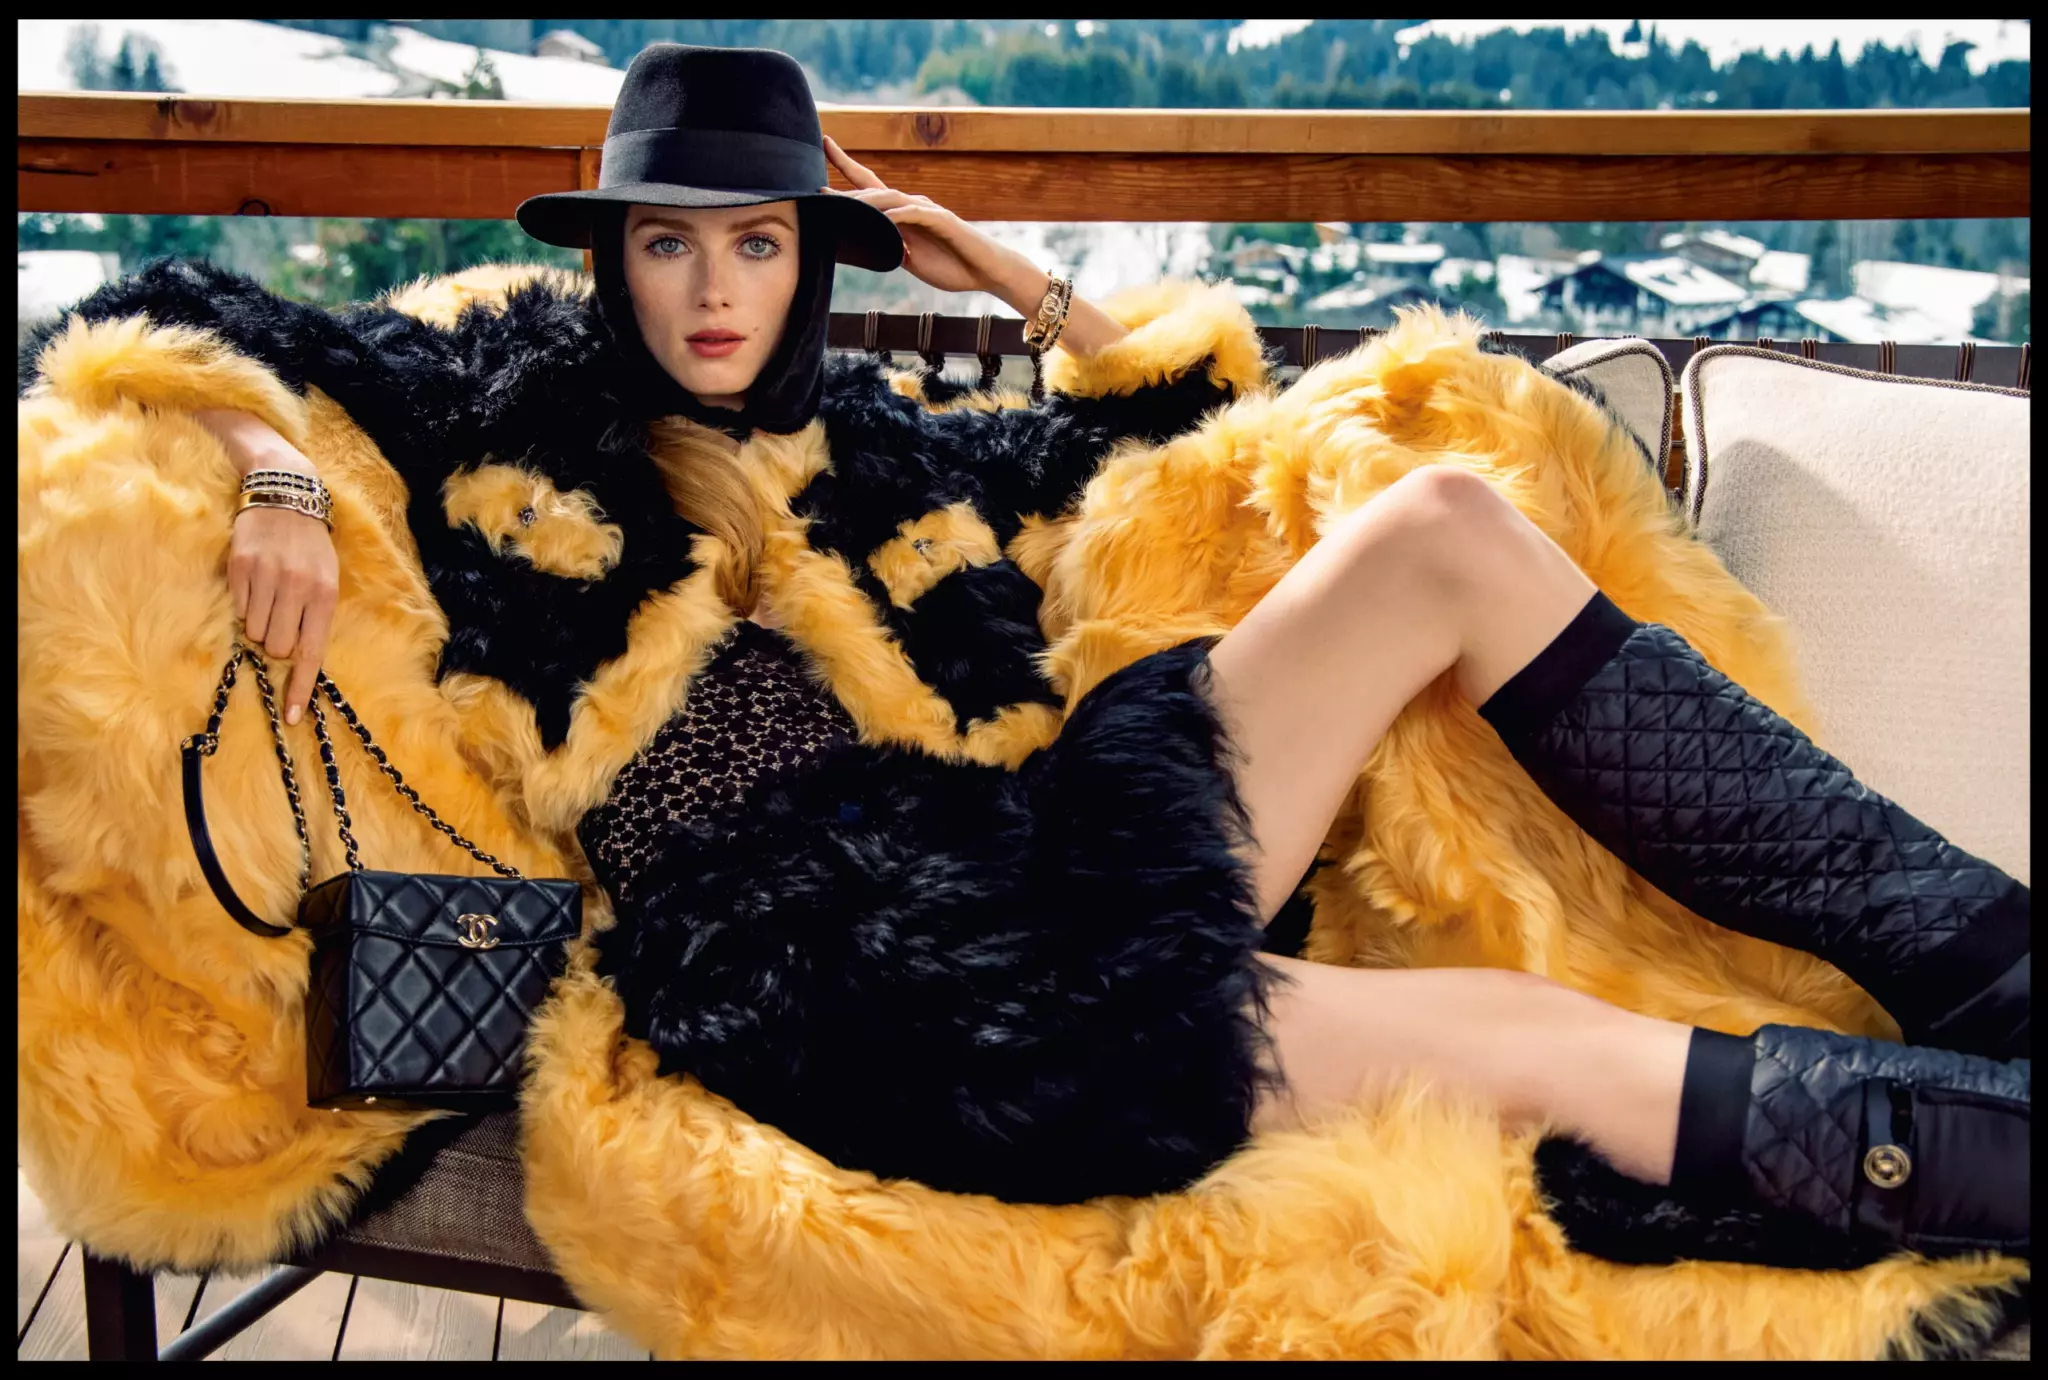 Fall-Winter 21/22 trends that fashionistas will adopt this season. Focus on iconic Chanel, Baum und Pferdgarten, By Malina and By Malene Birger. 11